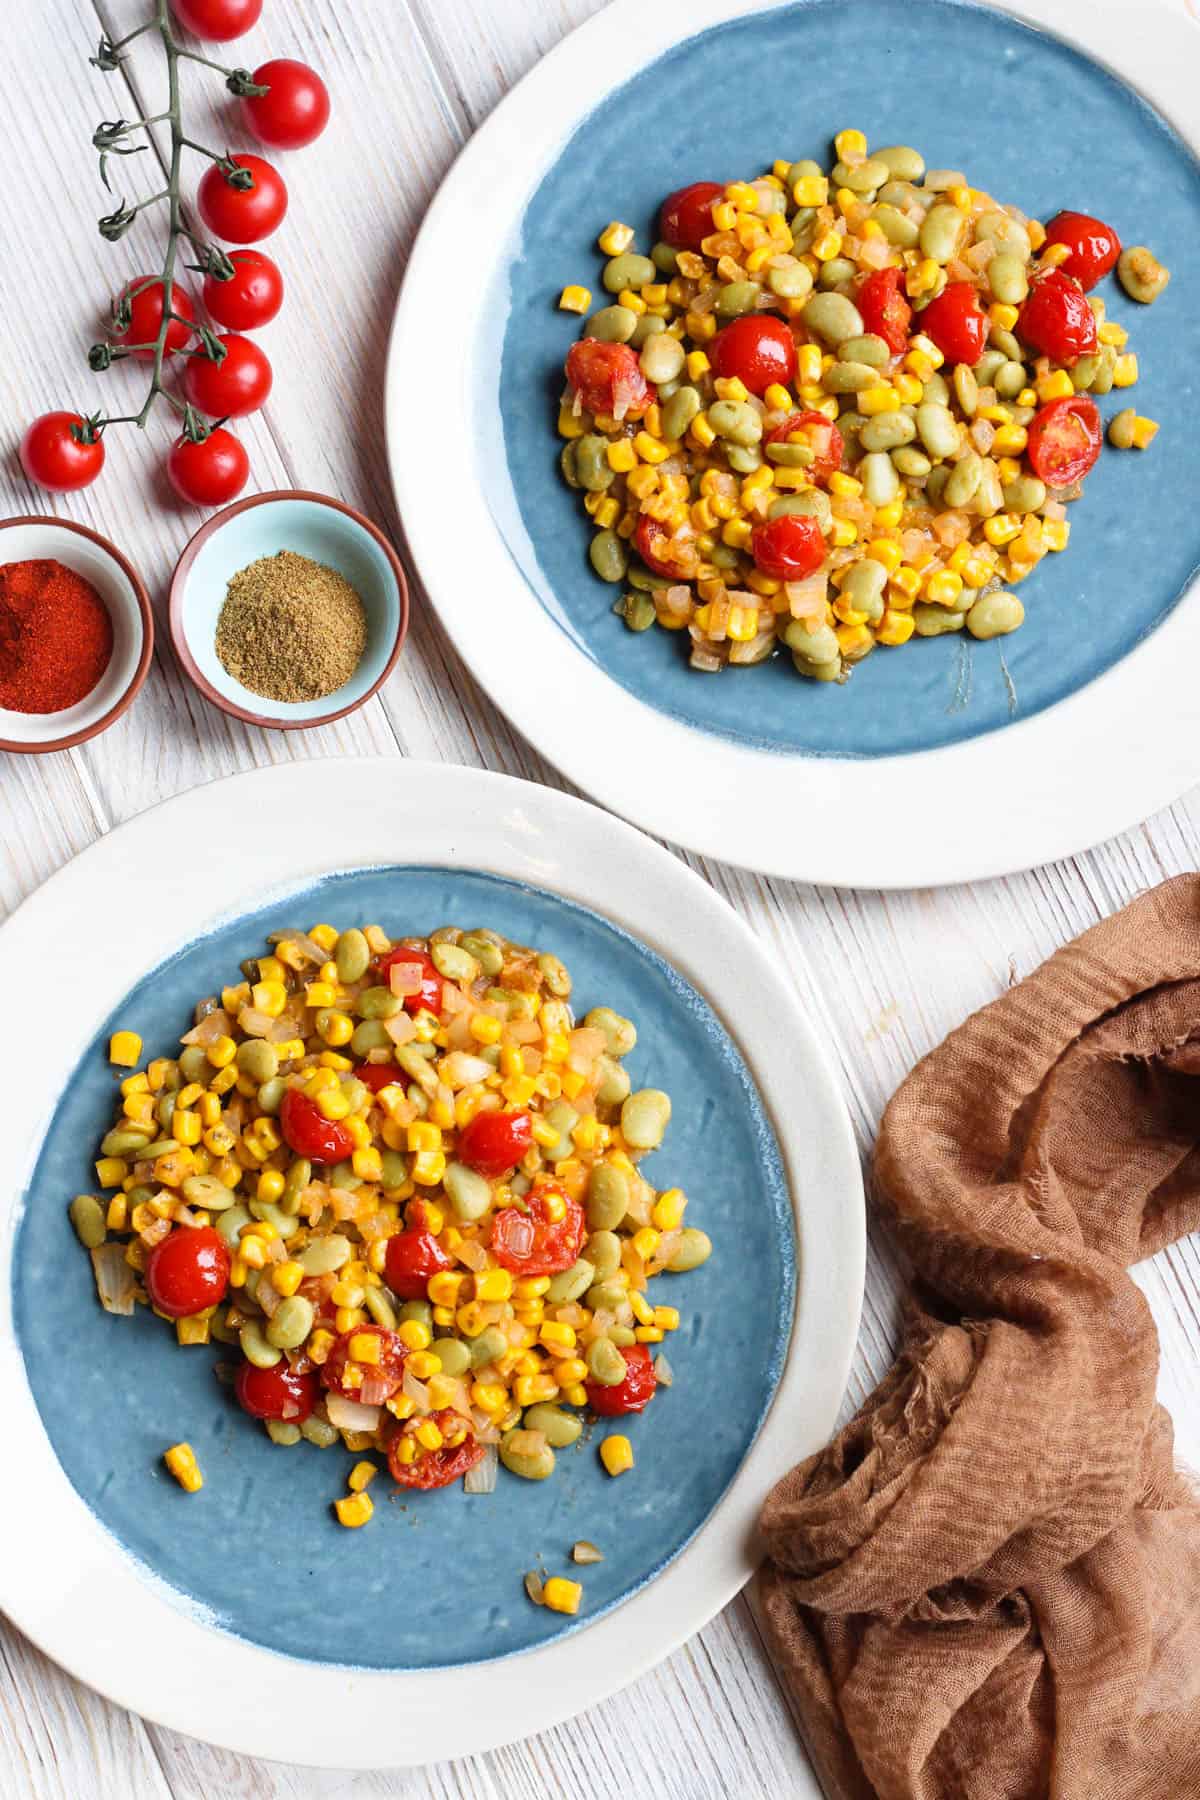 Two small blue plates with lima beans and succotash served next to cherry tomatoes and small bowls with spices.